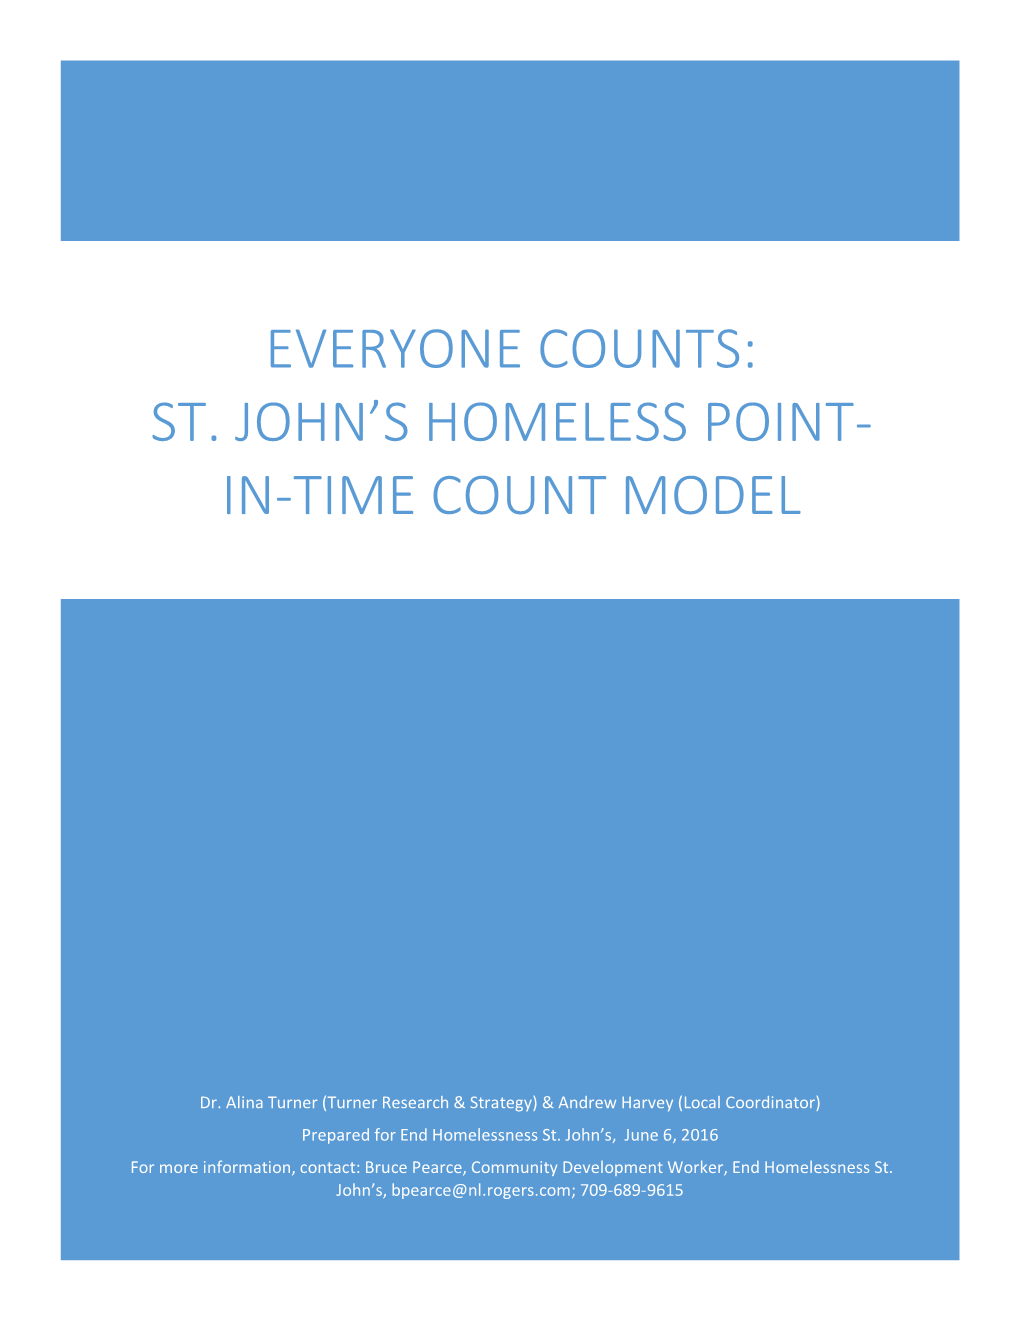 Everyone Counts: St. John's Homeless Point-In-Time Count Model